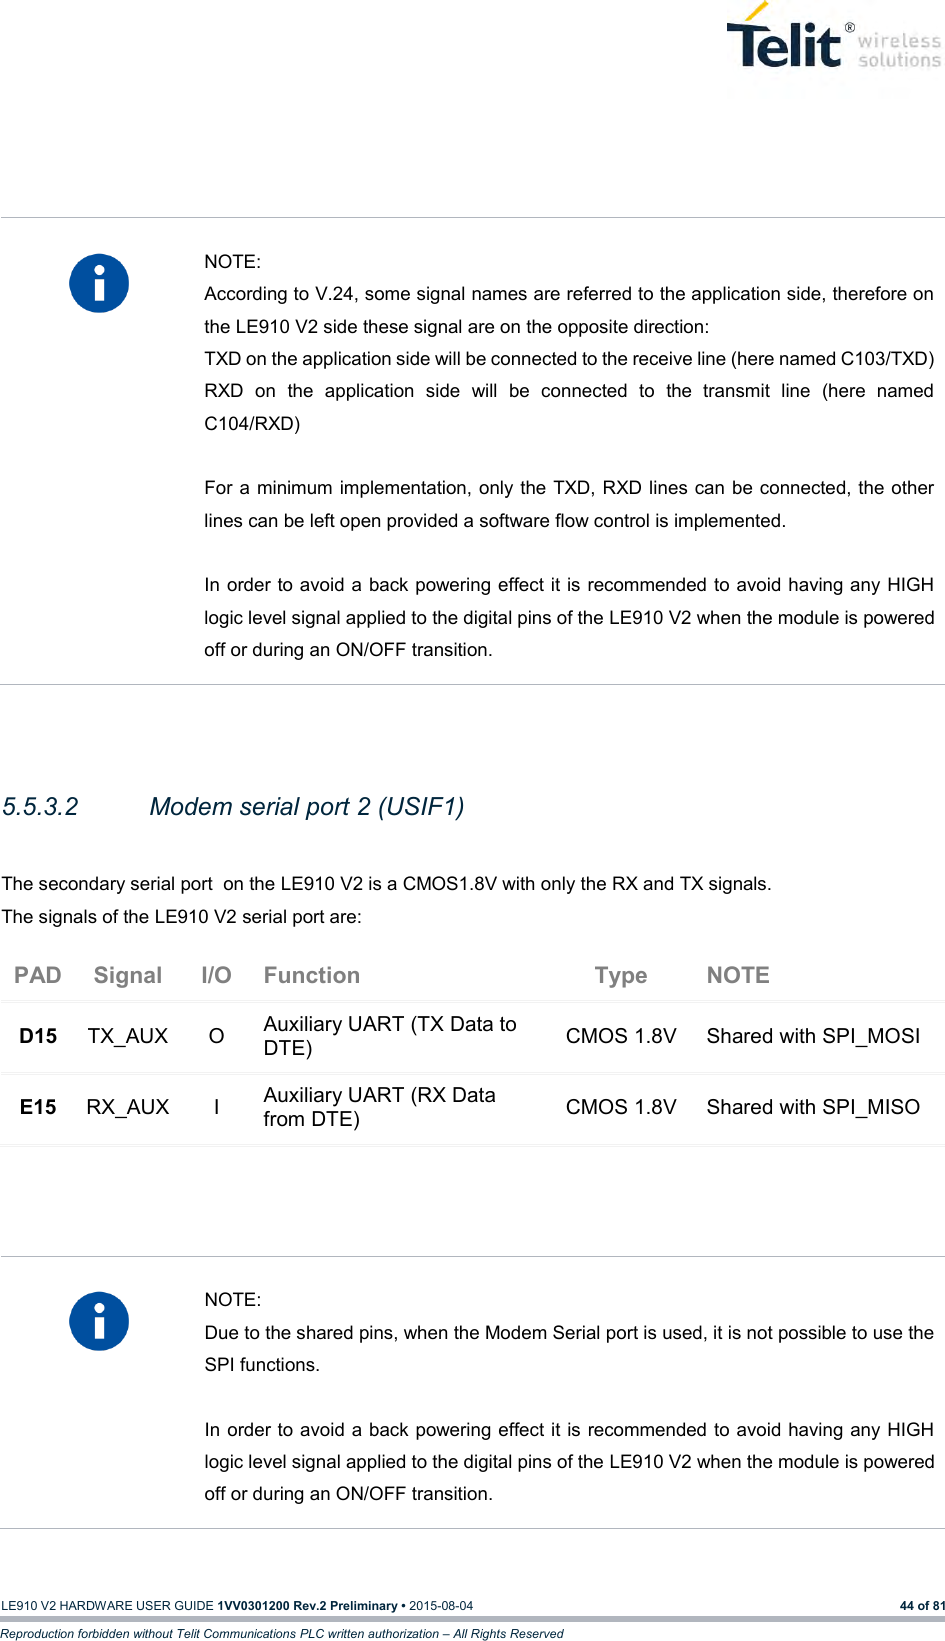   LE910 V2 HARDWARE USER GUIDE 1VV0301200 Rev.2 Preliminary • 2015-08-04 44 of 81 Reproduction forbidden without Telit Communications PLC written authorization – All Rights Reserved      NOTE: According to V.24, some signal names are referred to the application side, therefore on the LE910 V2 side these signal are on the opposite direction:  TXD on the application side will be connected to the receive line (here named C103/TXD) RXD  on  the  application  side  will  be  connected  to  the  transmit  line  (here  named C104/RXD)  For a  minimum implementation, only the TXD, RXD lines can be connected, the other lines can be left open provided a software flow control is implemented.  In order to avoid a back powering effect it is recommended to avoid having any HIGH logic level signal applied to the digital pins of the LE910 V2 when the module is powered off or during an ON/OFF transition.   5.5.3.2  Modem serial port 2 (USIF1)  The secondary serial port  on the LE910 V2 is a CMOS1.8V with only the RX and TX signals.  The signals of the LE910 V2 serial port are: PAD Signal I/O Function Type NOTE D15 TX_AUX O Auxiliary UART (TX Data to DTE) CMOS 1.8V Shared with SPI_MOSI E15 RX_AUX I Auxiliary UART (RX Data from DTE) CMOS 1.8V Shared with SPI_MISO      NOTE: Due to the shared pins, when the Modem Serial port is used, it is not possible to use the SPI functions.  In order to avoid a back powering effect it is recommended to avoid having any HIGH logic level signal applied to the digital pins of the LE910 V2 when the module is powered off or during an ON/OFF transition.  